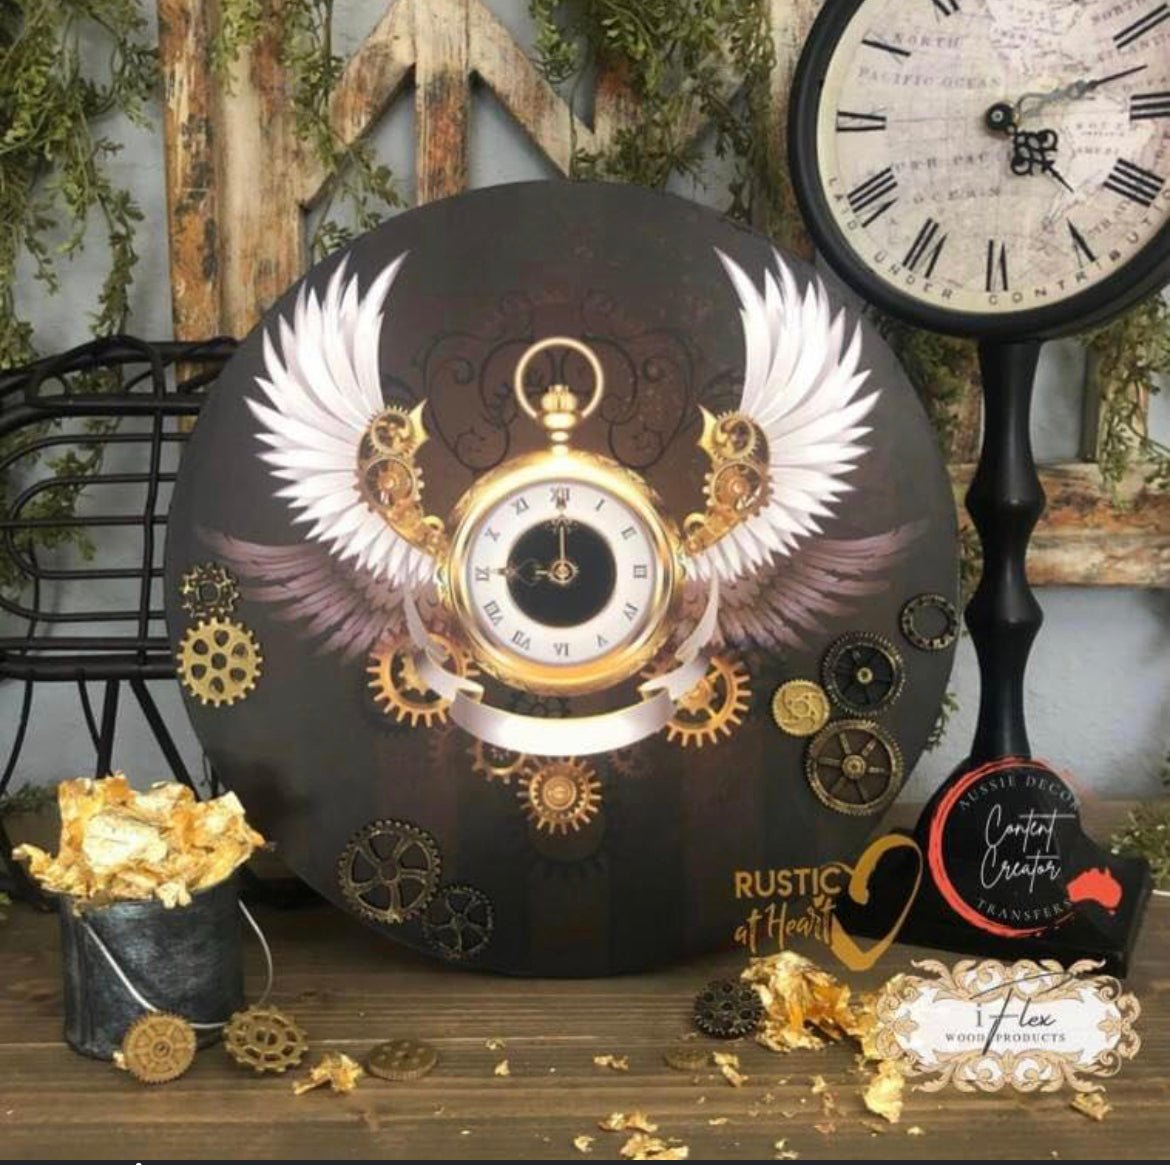 Aussie Decor Transfers Poster Print White Winged Clock - Not Your Average Poster Print!